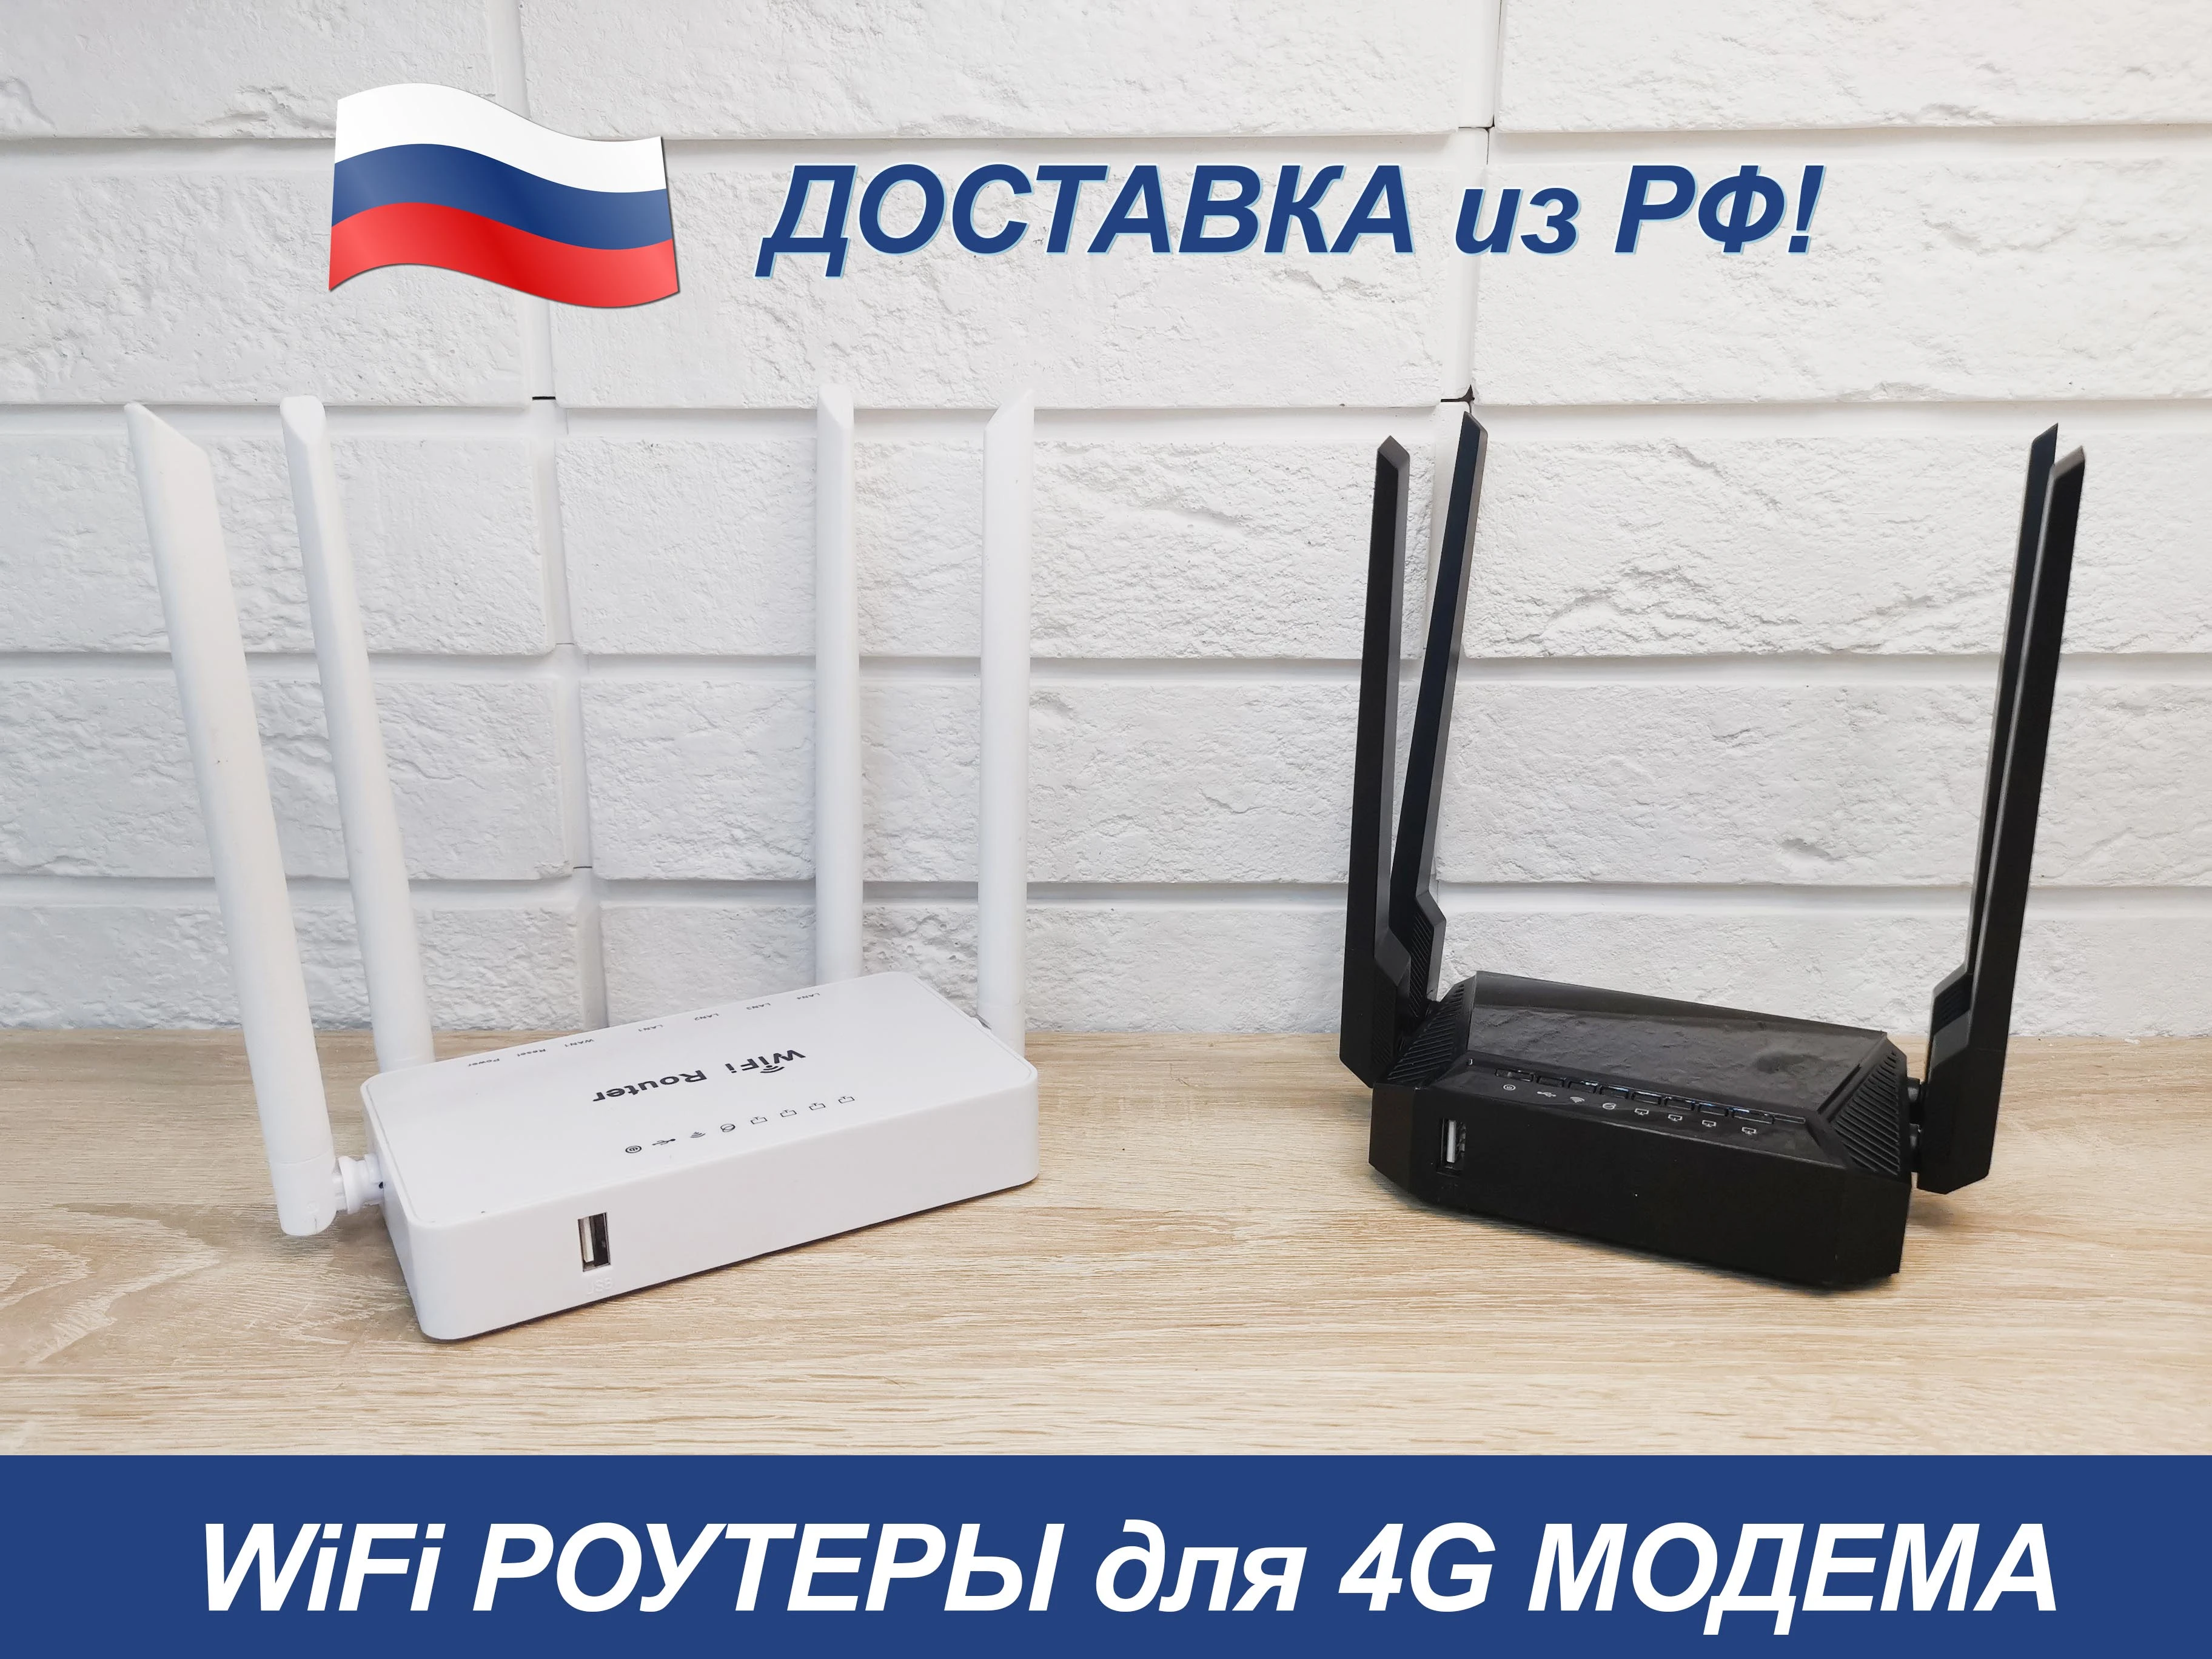 WiFi router for 4G modem Huawei ZTE powerful ZBT 1626 3826 we1626 repeater  ZyXEL OS for a set of internet at home and at home|3G/4G Routers| -  AliExpress